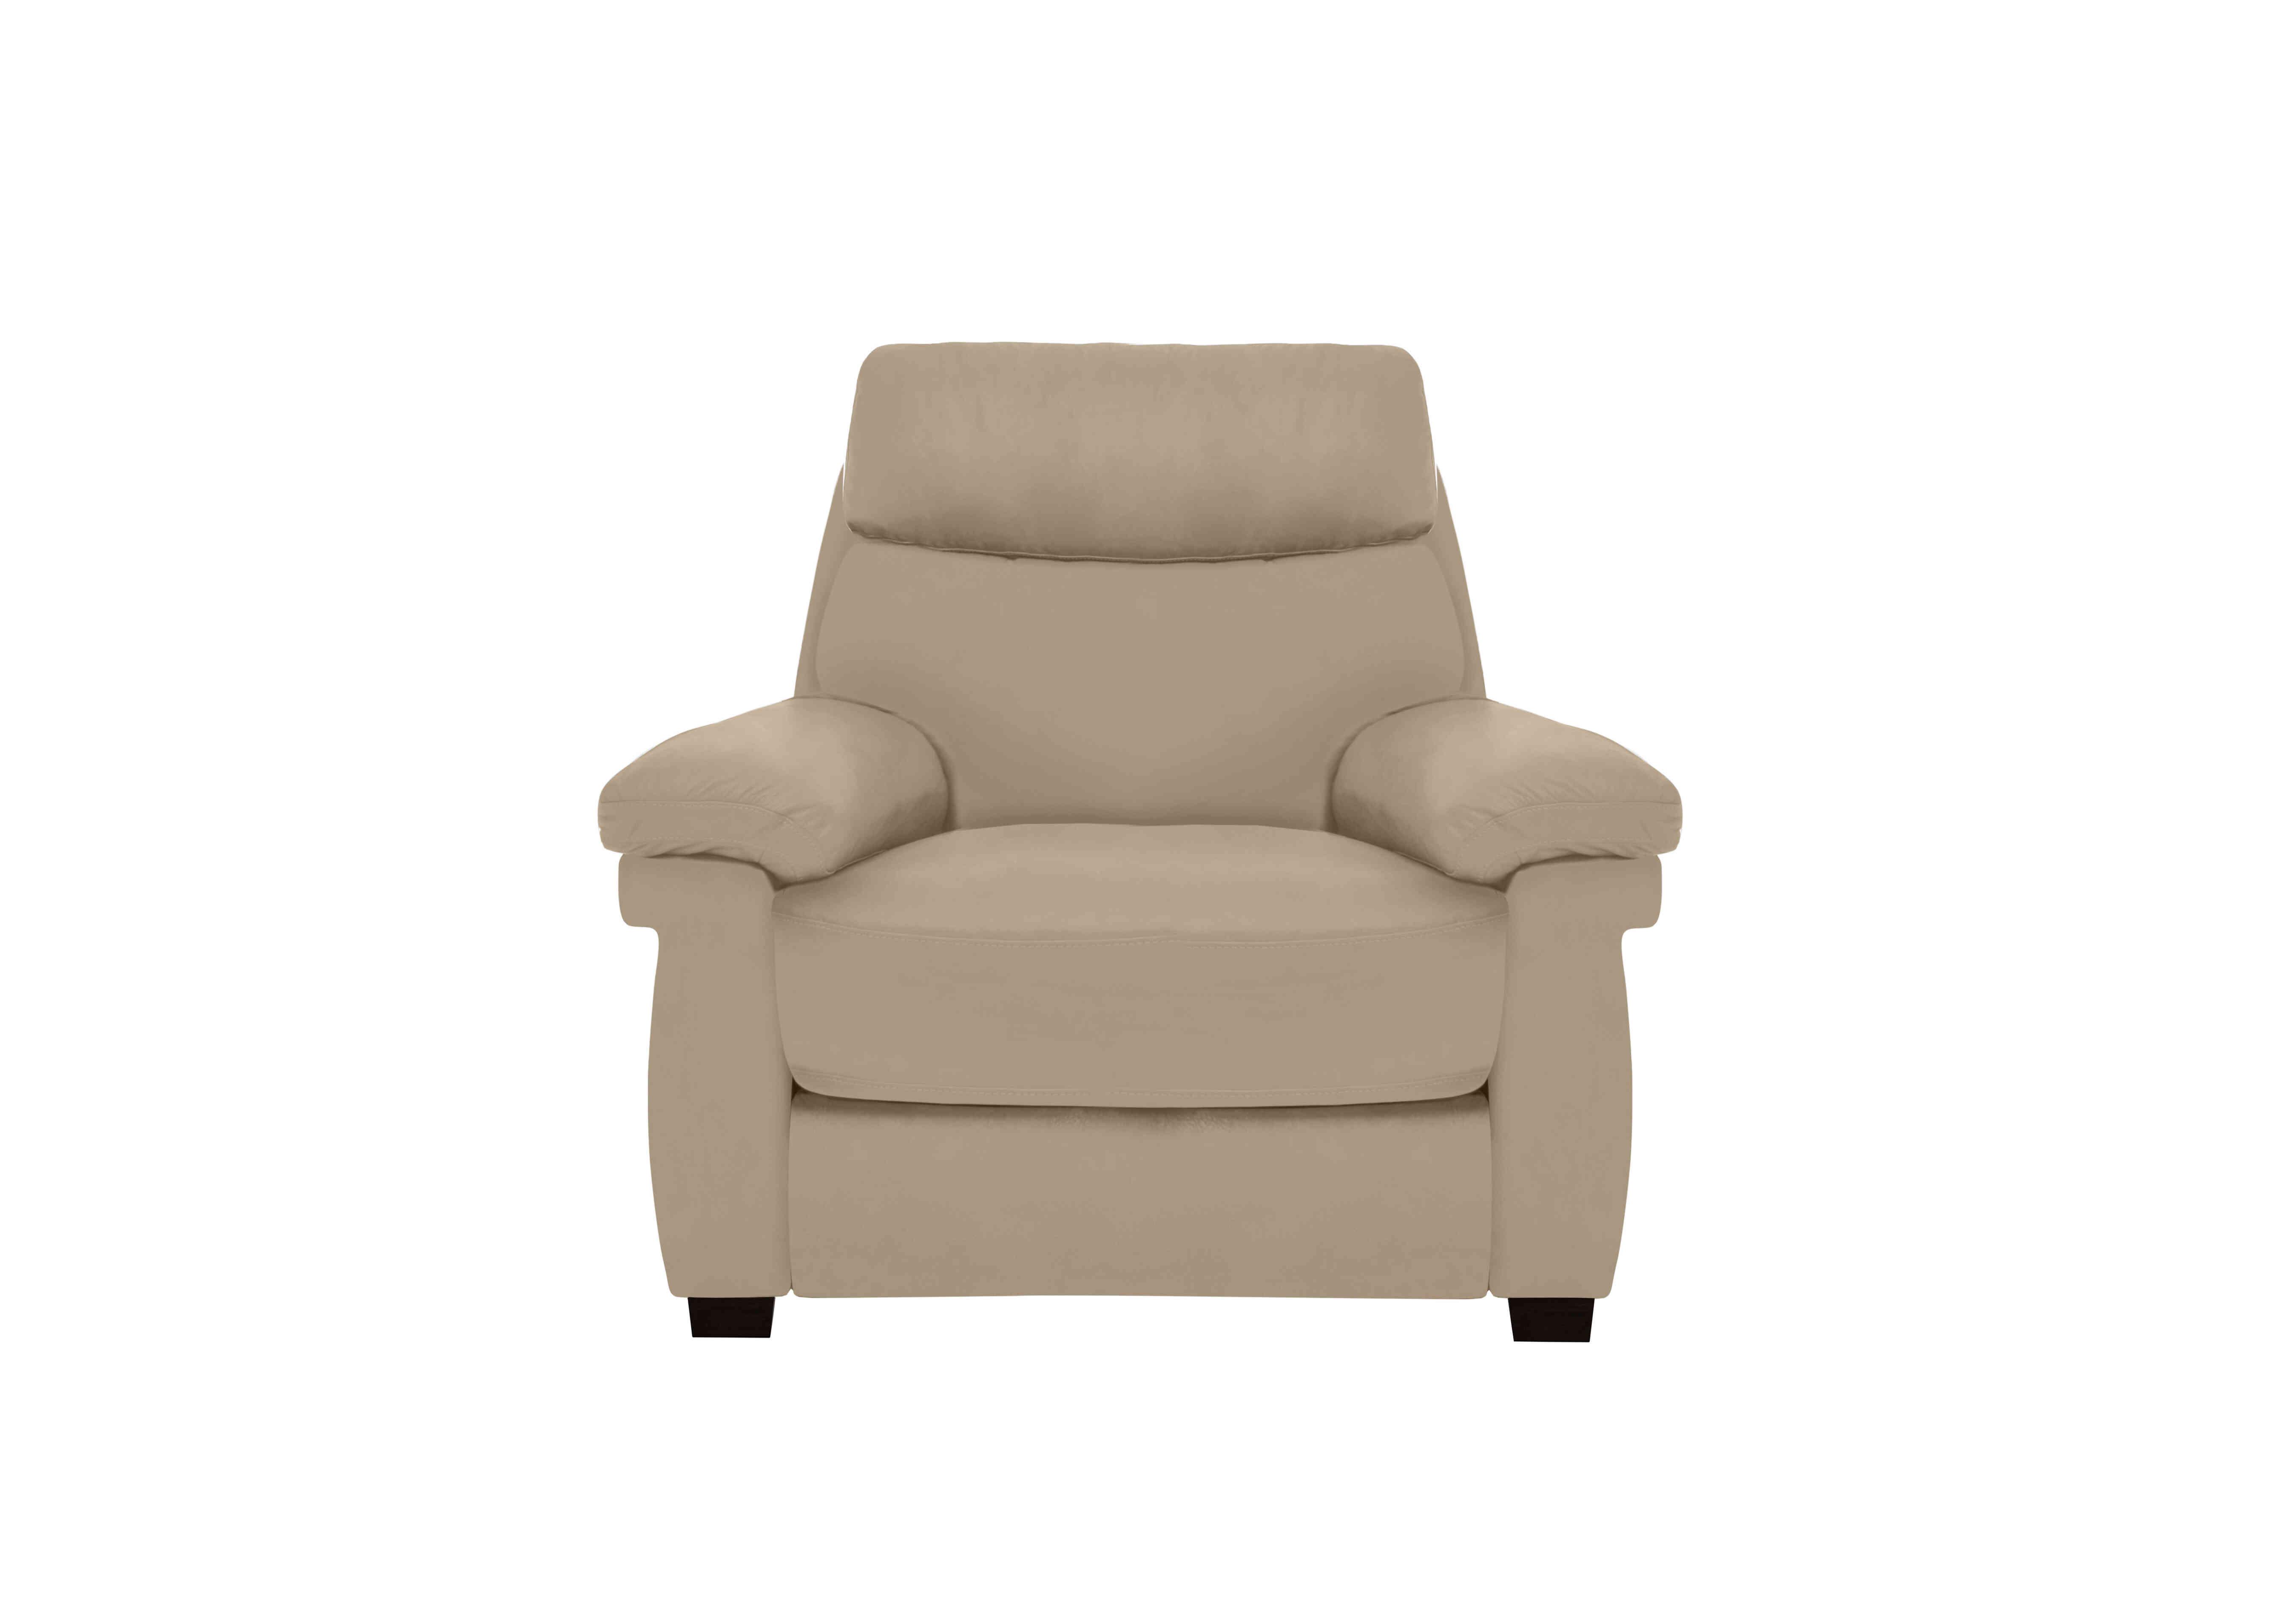 Serene Leather Chair in Bx-039c Pebble on Furniture Village